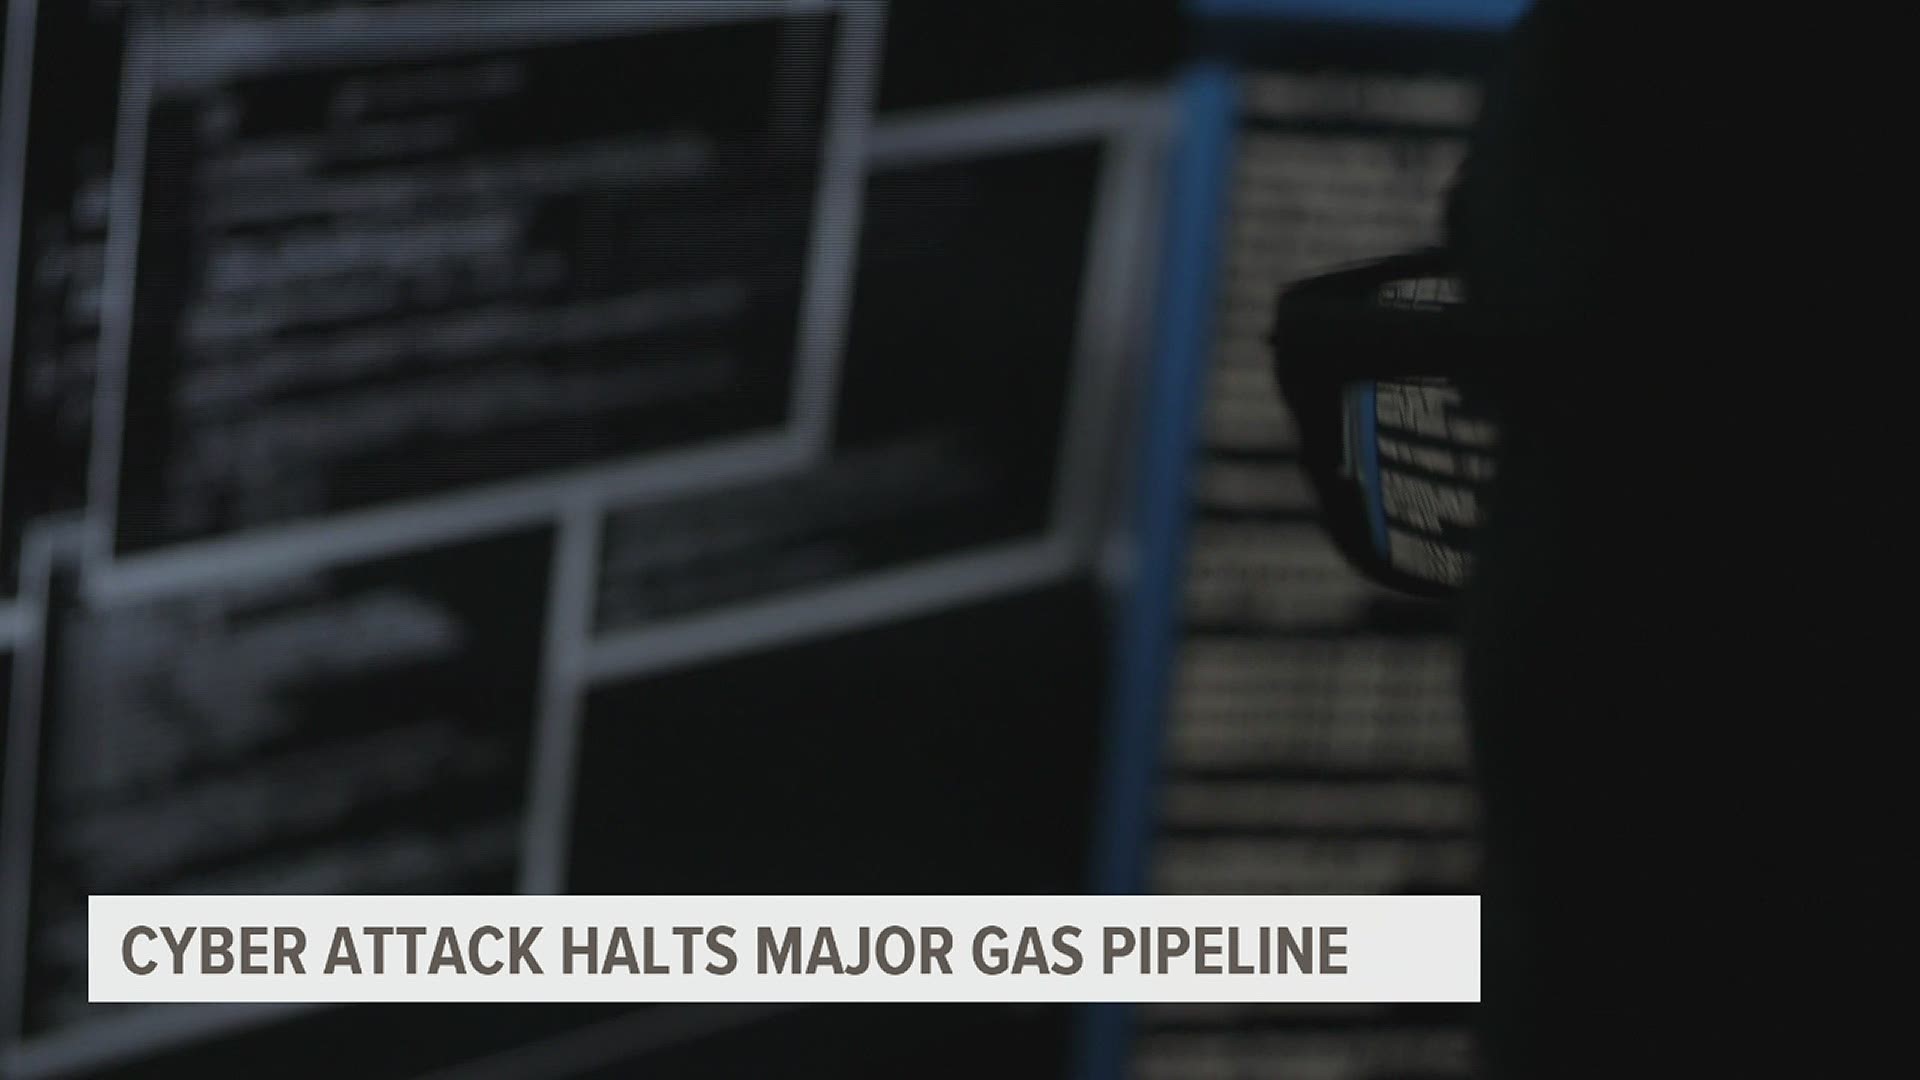 The pipeline shutdown has highlighted the risks faced by any company using the internet.